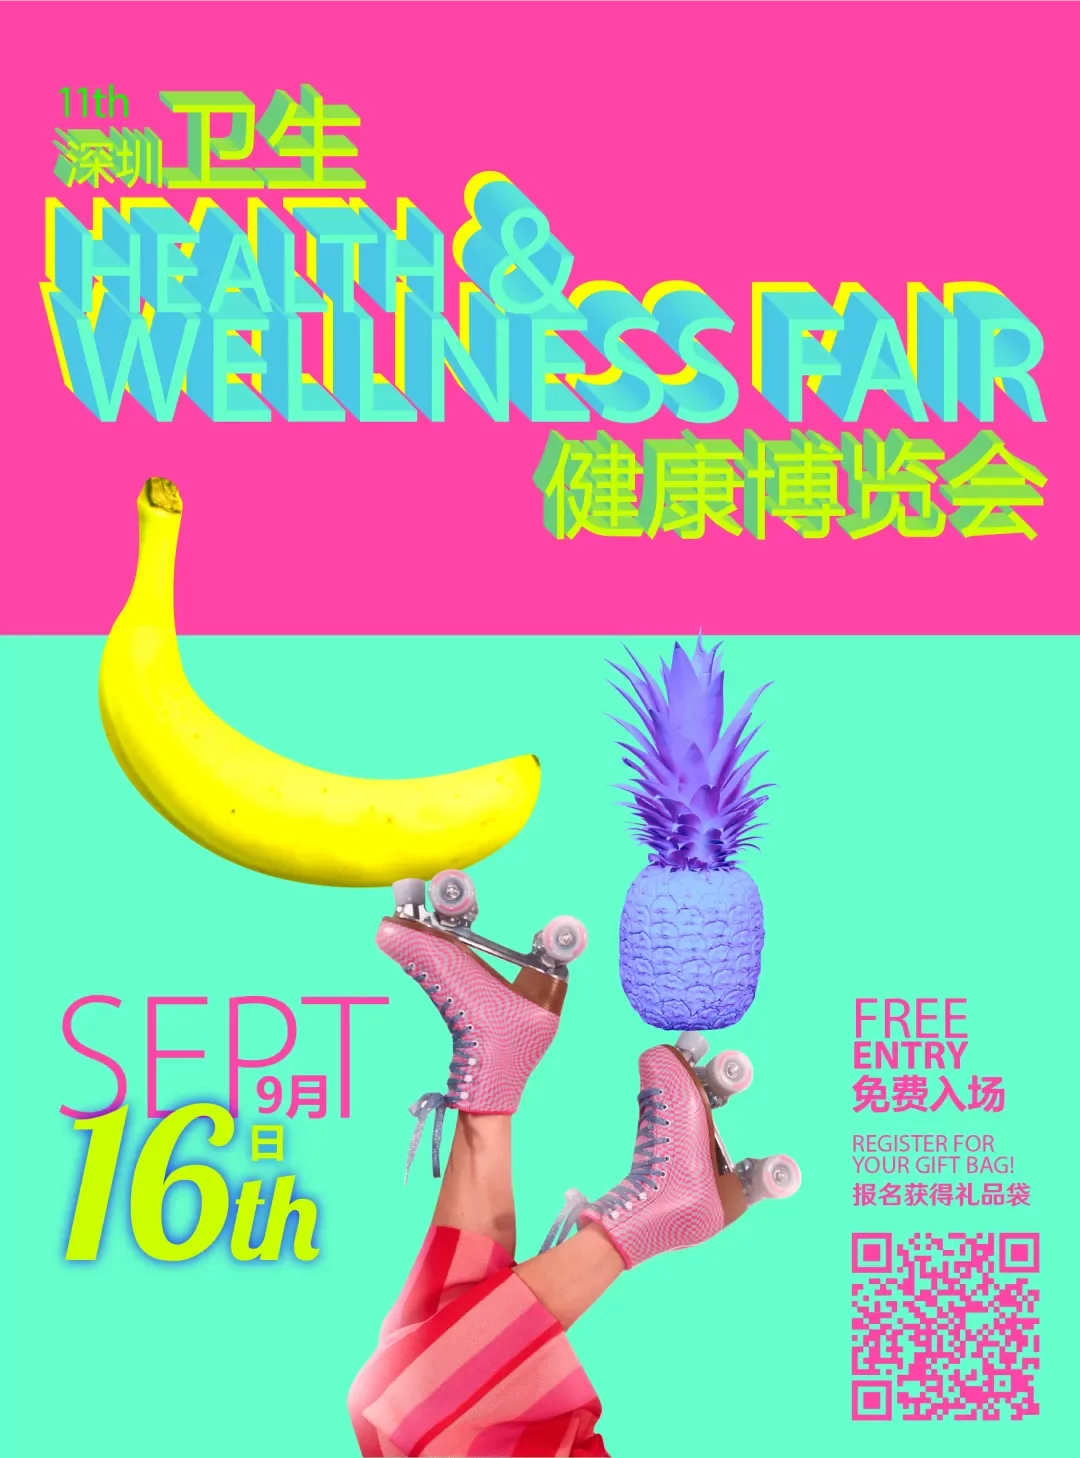 Featured image for “Health & Wellness Fair THIS SATURDAY!”